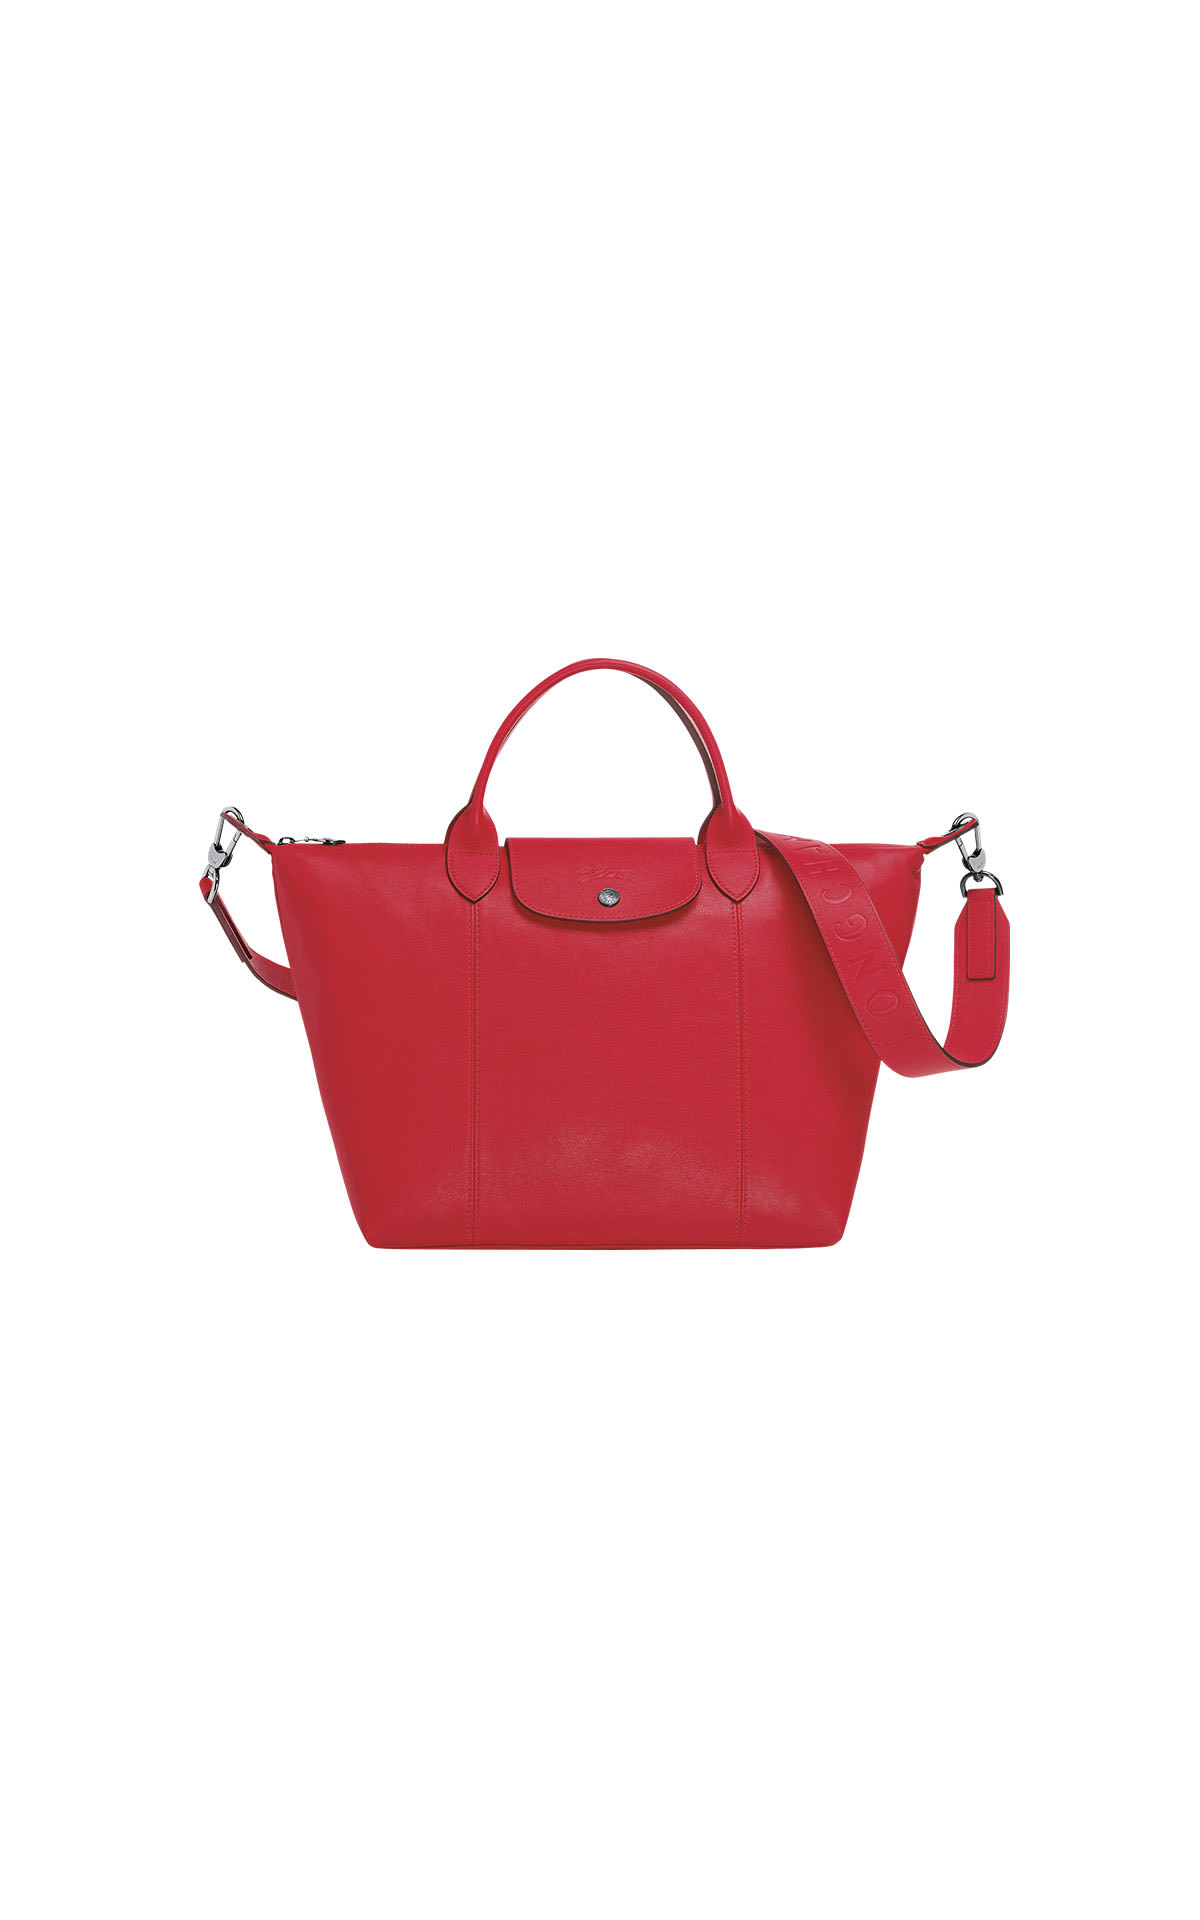 Longchamp Le Pliage cuir medium sized top handle bag with detachable strap  from Bicester Village